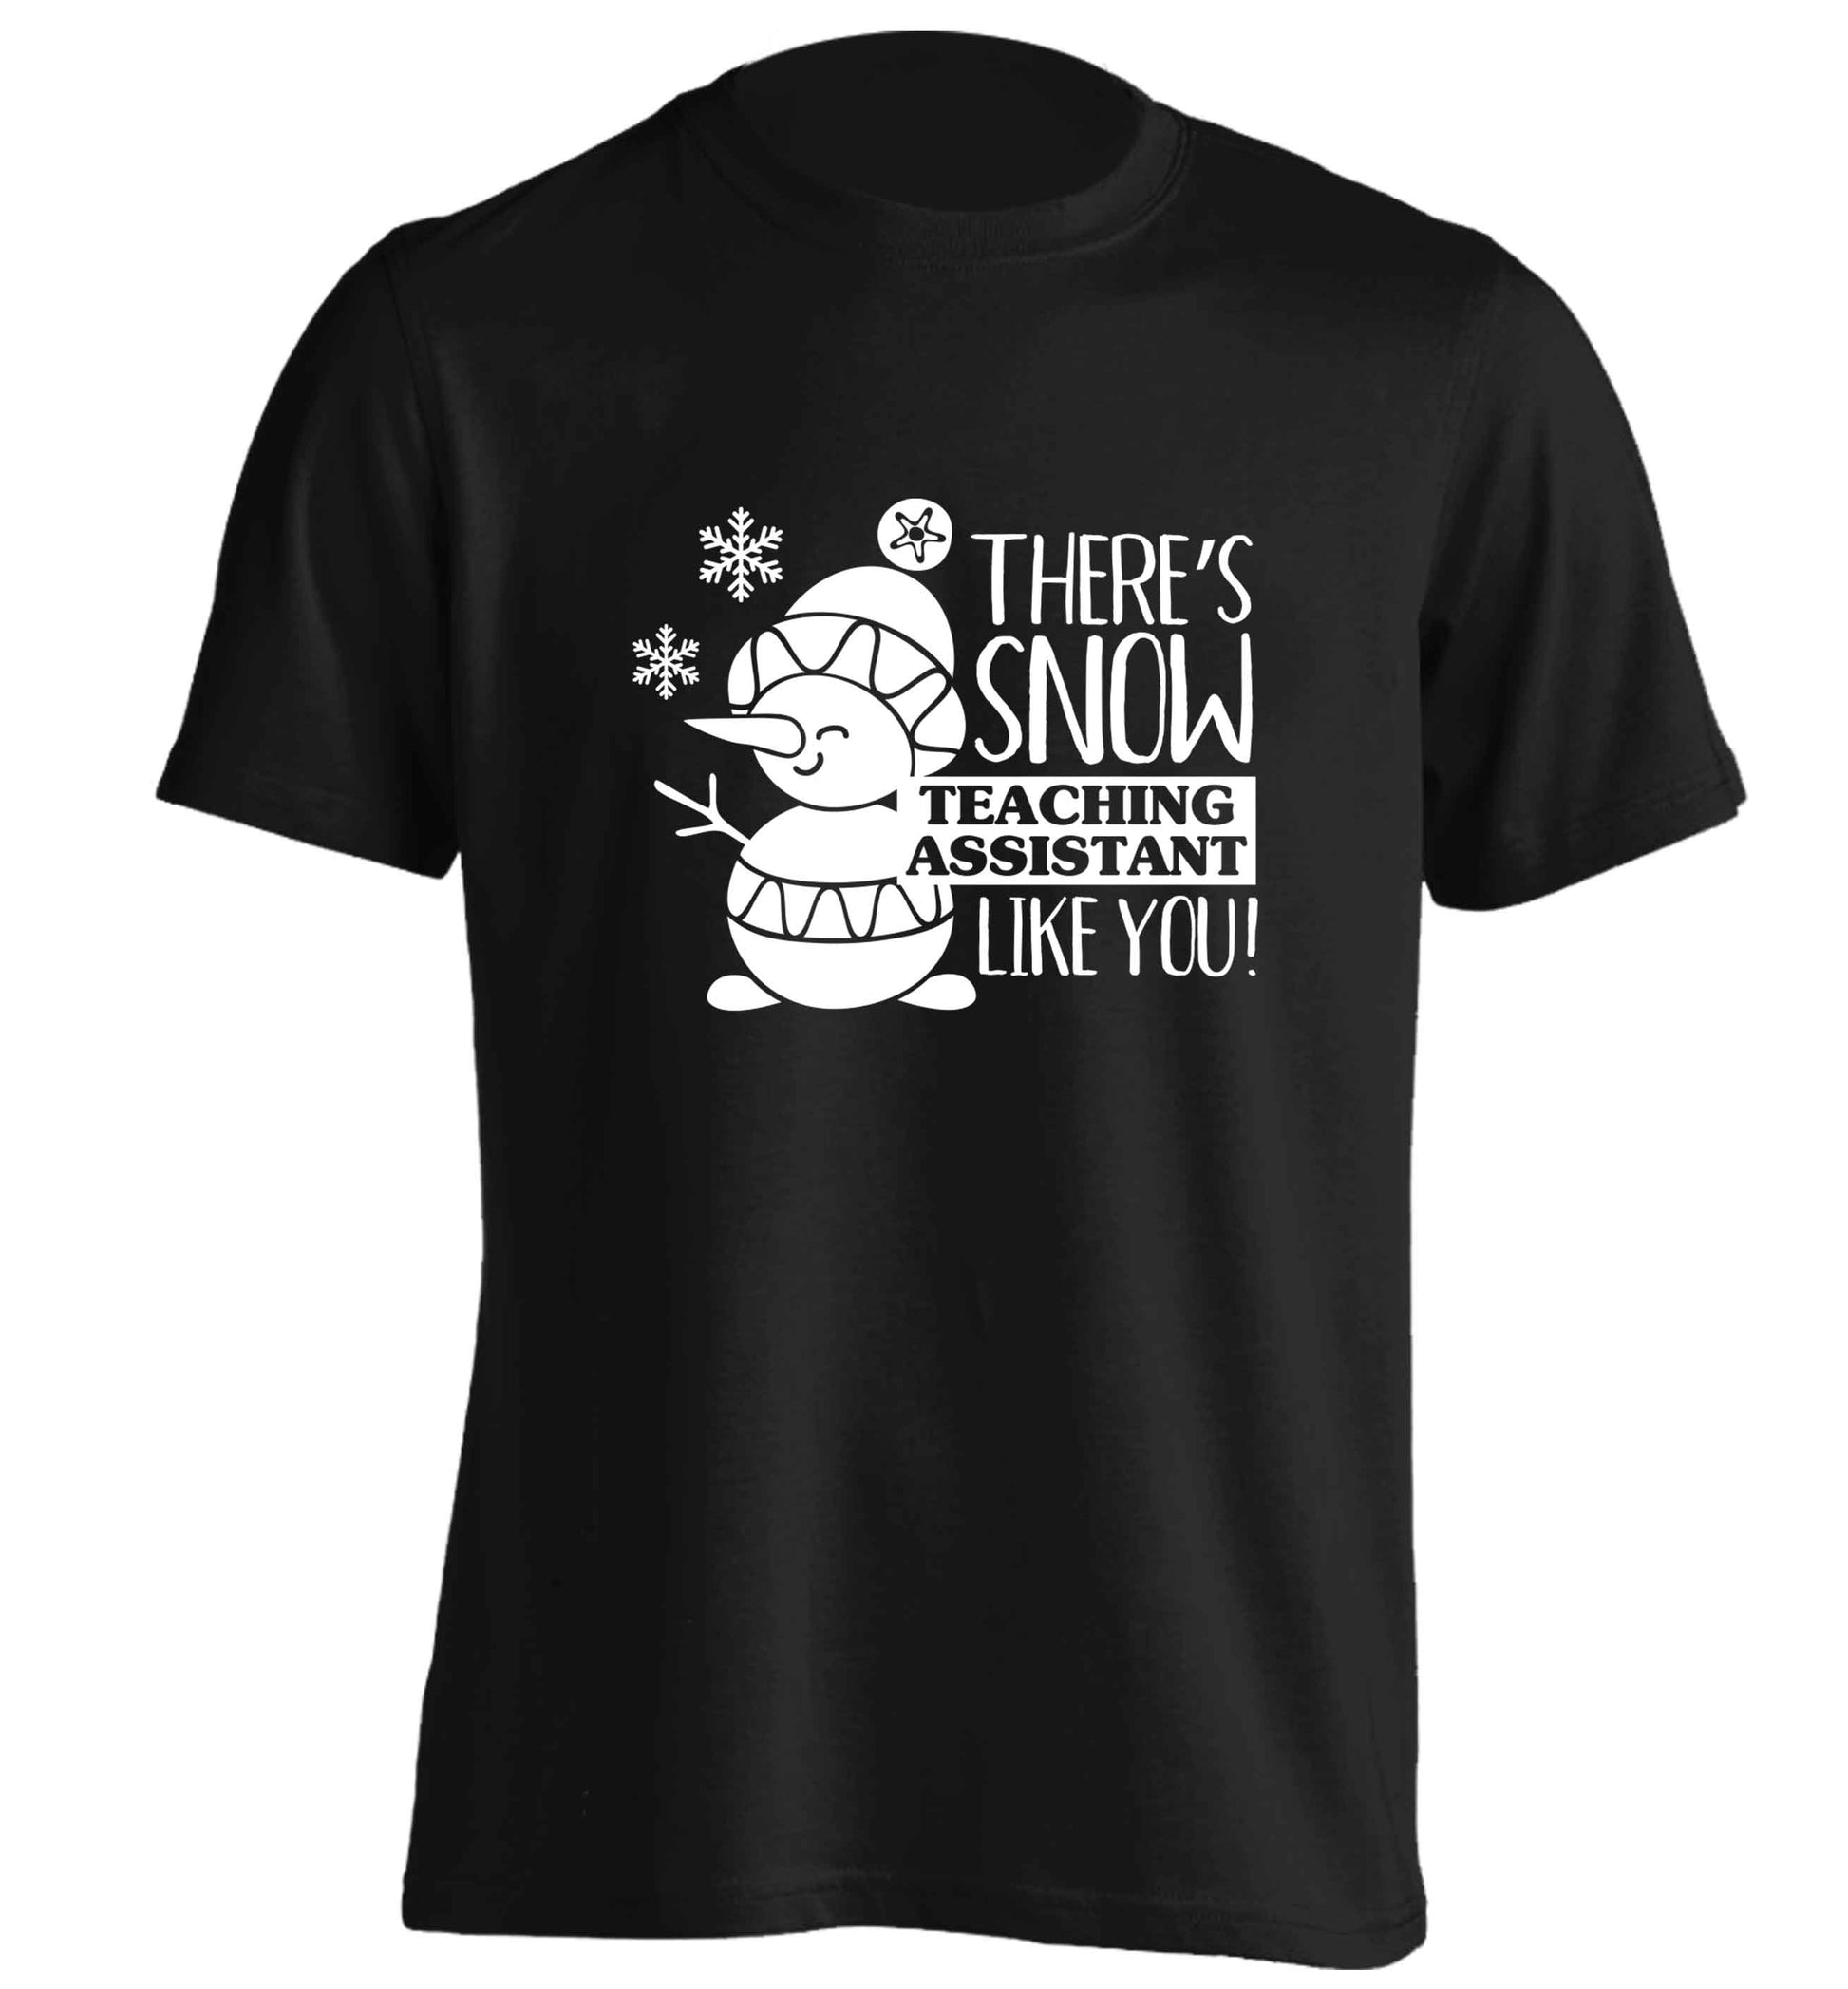 There's snow teaching assistant like you adults unisex black Tshirt 2XL